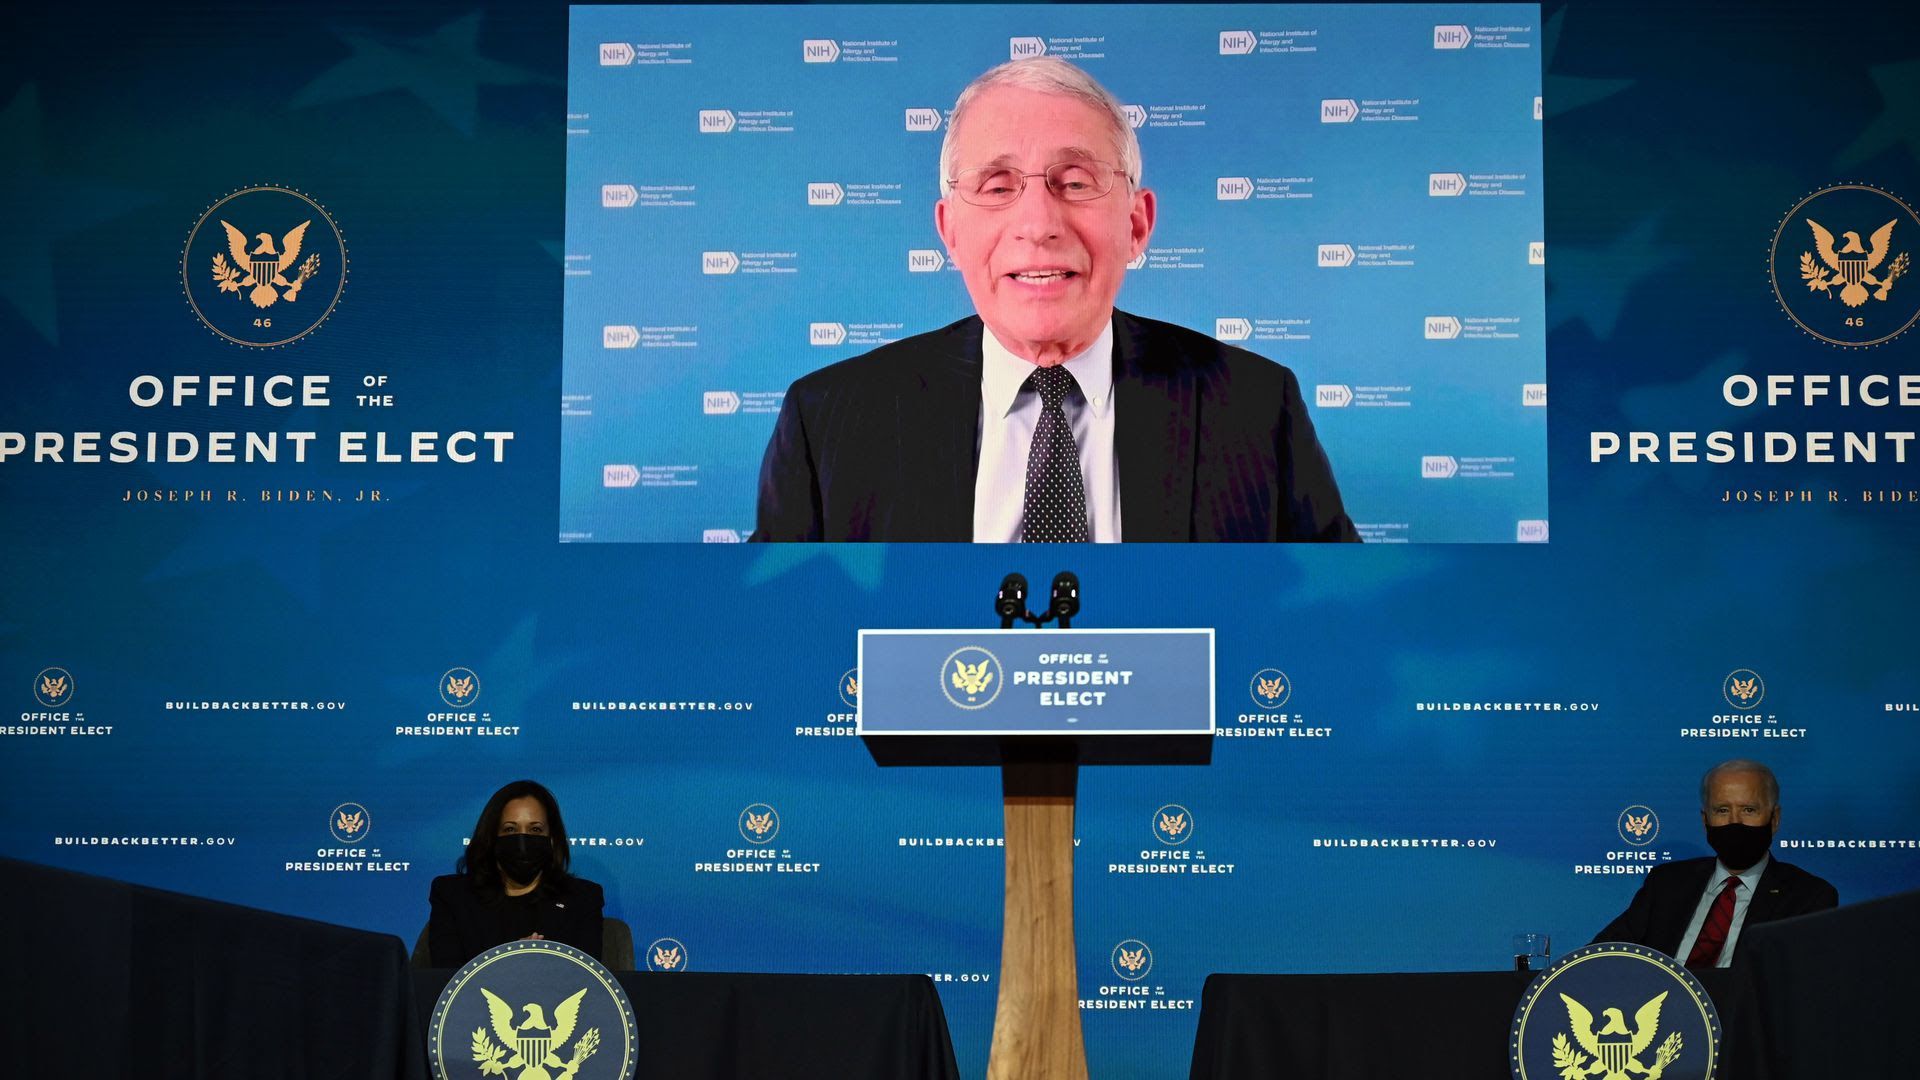 Anthony Fauci appears via video today with Vice President-elect Harris and President-elect Biden. Photo: Jim Watson/AFP via Getty Images